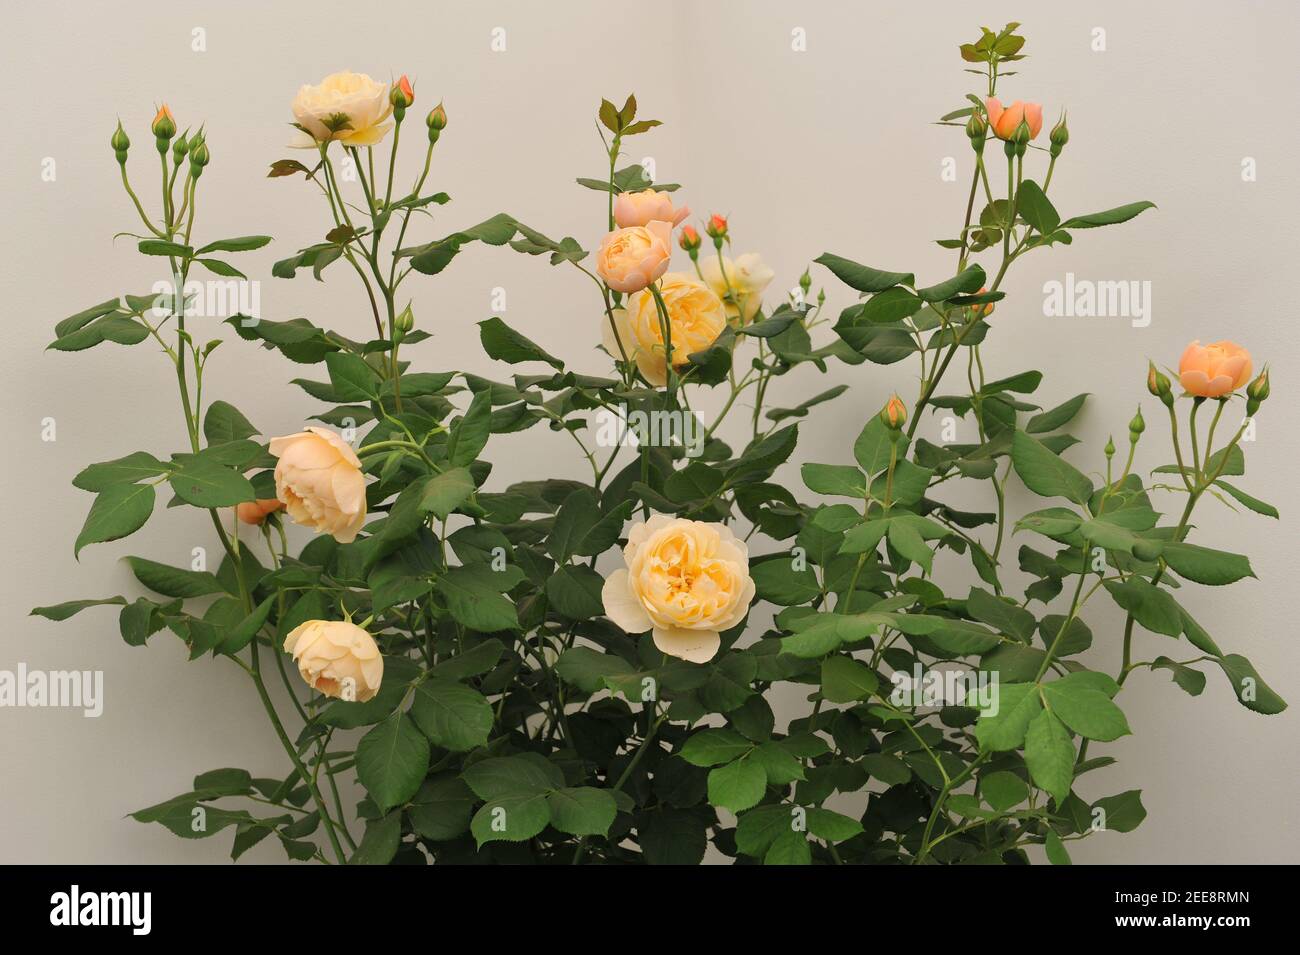 Orange-peach shrub English rose (Rosa) Roald Dahl blooms on an exhibition in May Stock Photo